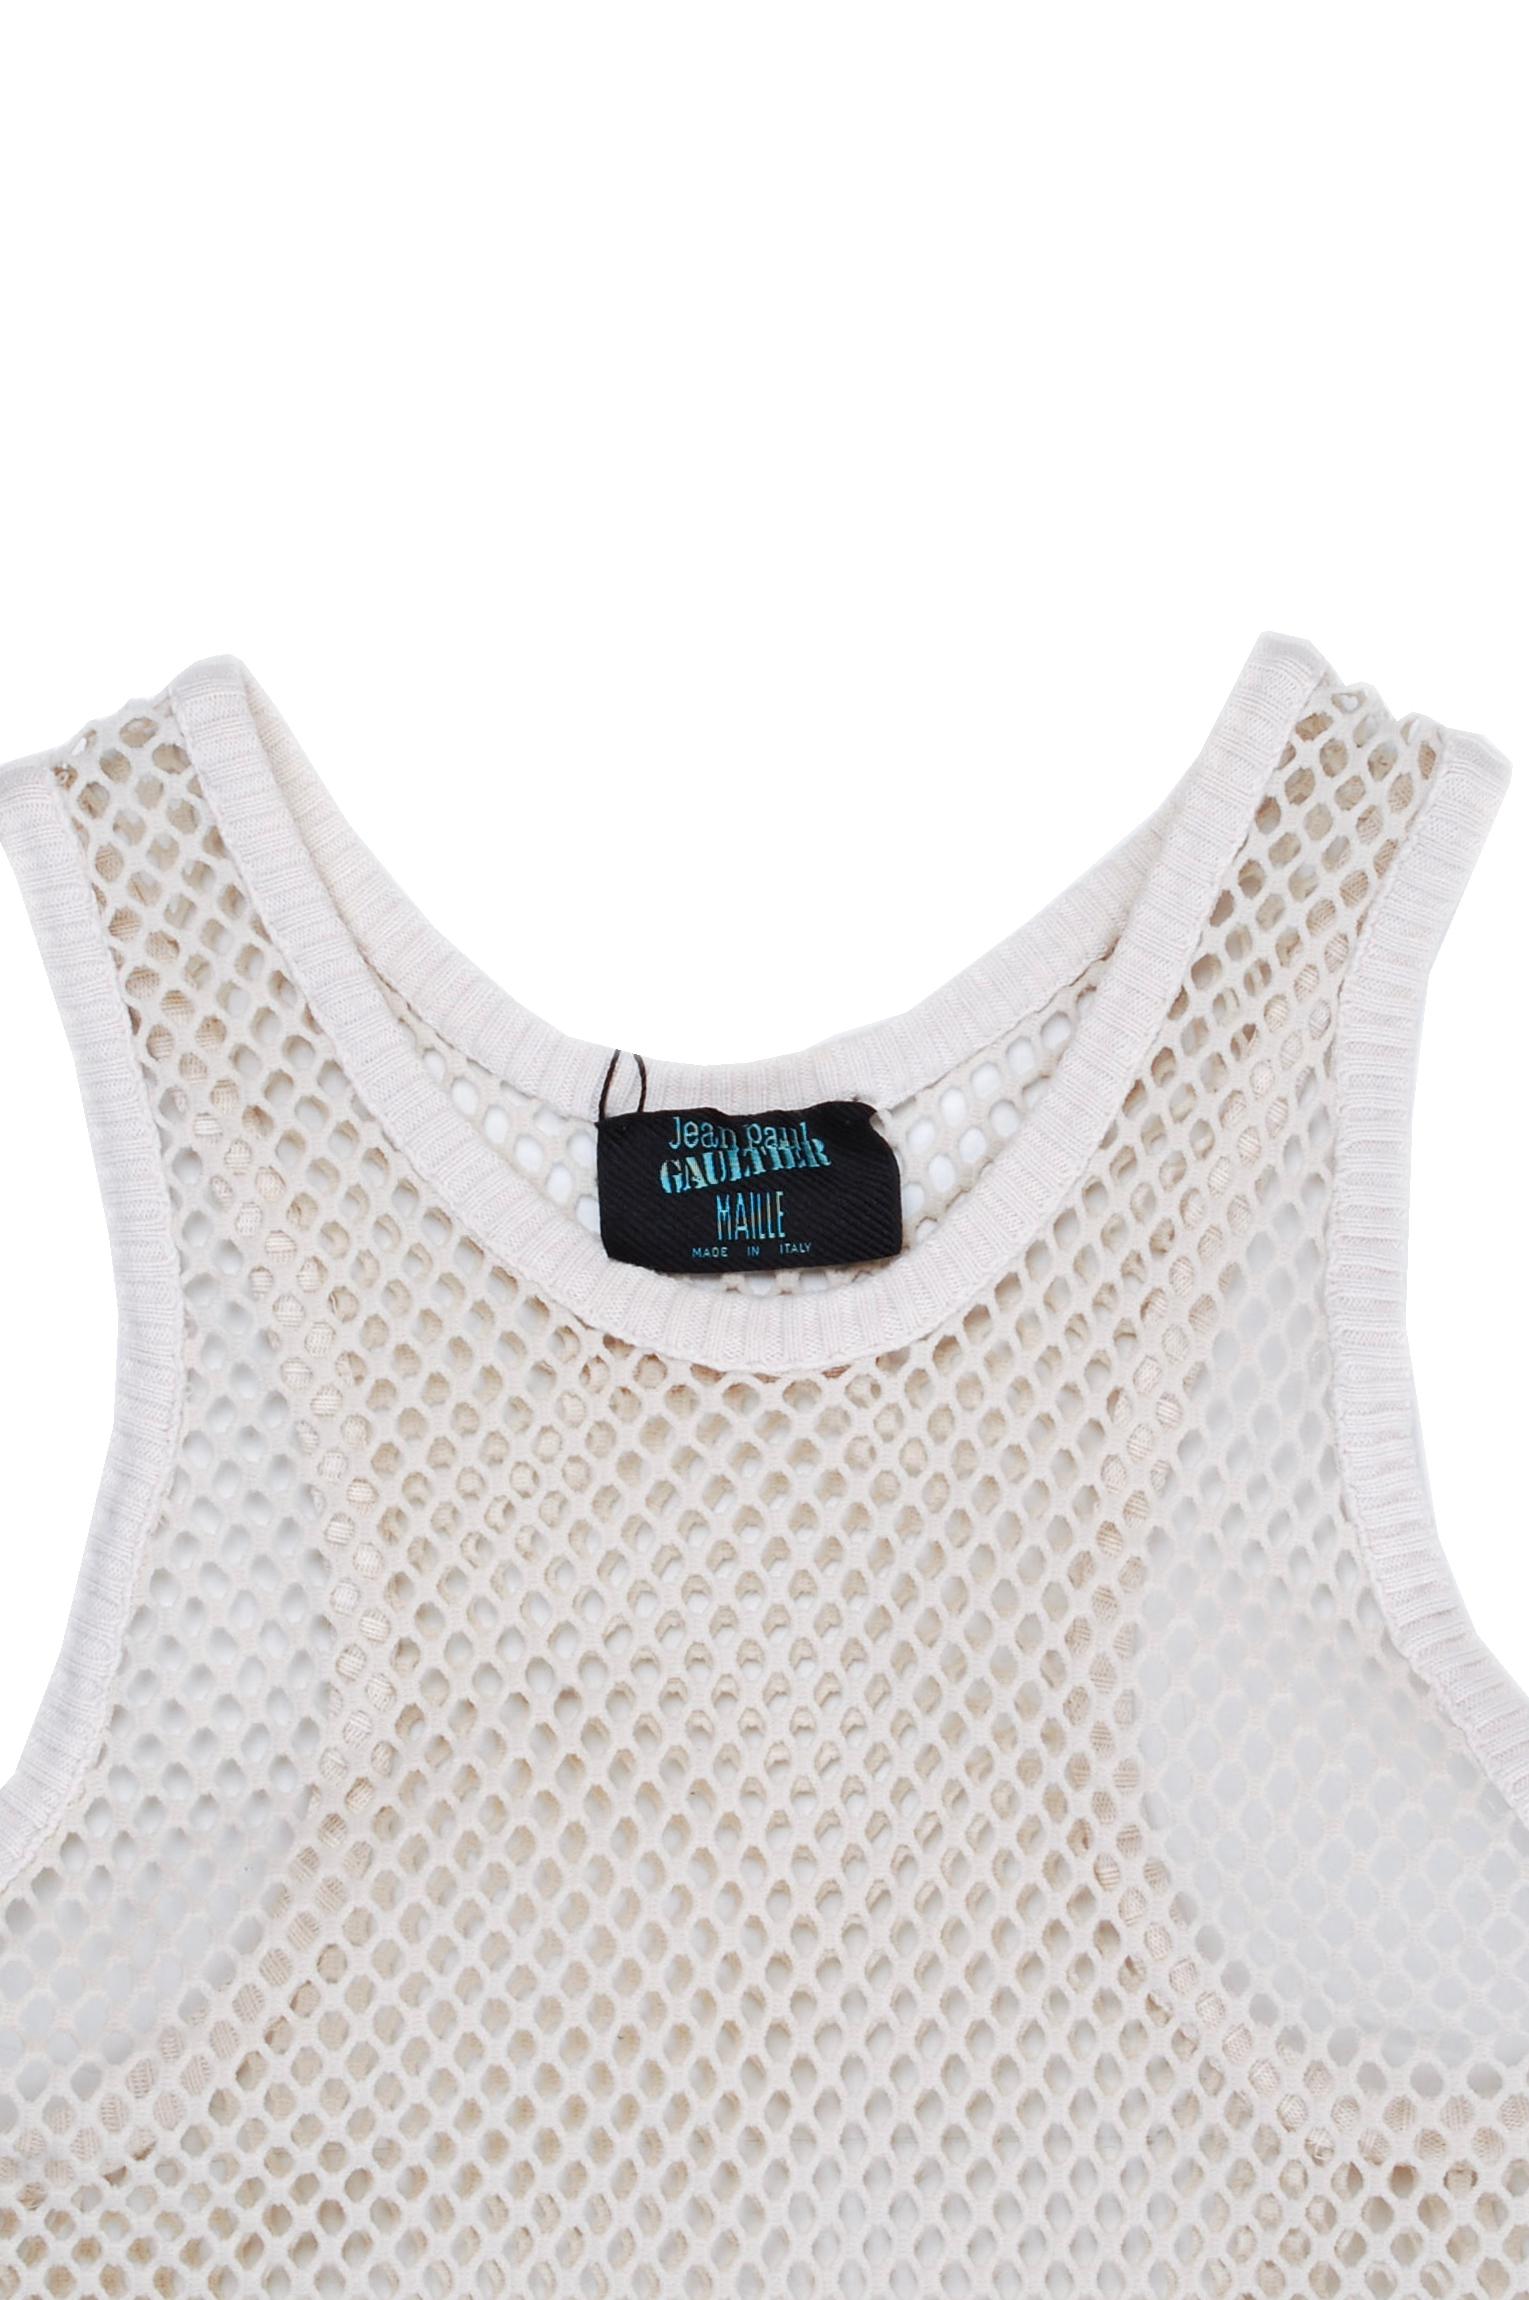 Item for sale is 100% genuine Jean Paul Gaultier Mesh Top Men T-Shirt 
Color: Cream
(An actual color may a bit vary due to individual computer screen interpretation)
Material: No tag, seems cotton blend
Tag size: S/M
This t shirt is great quality